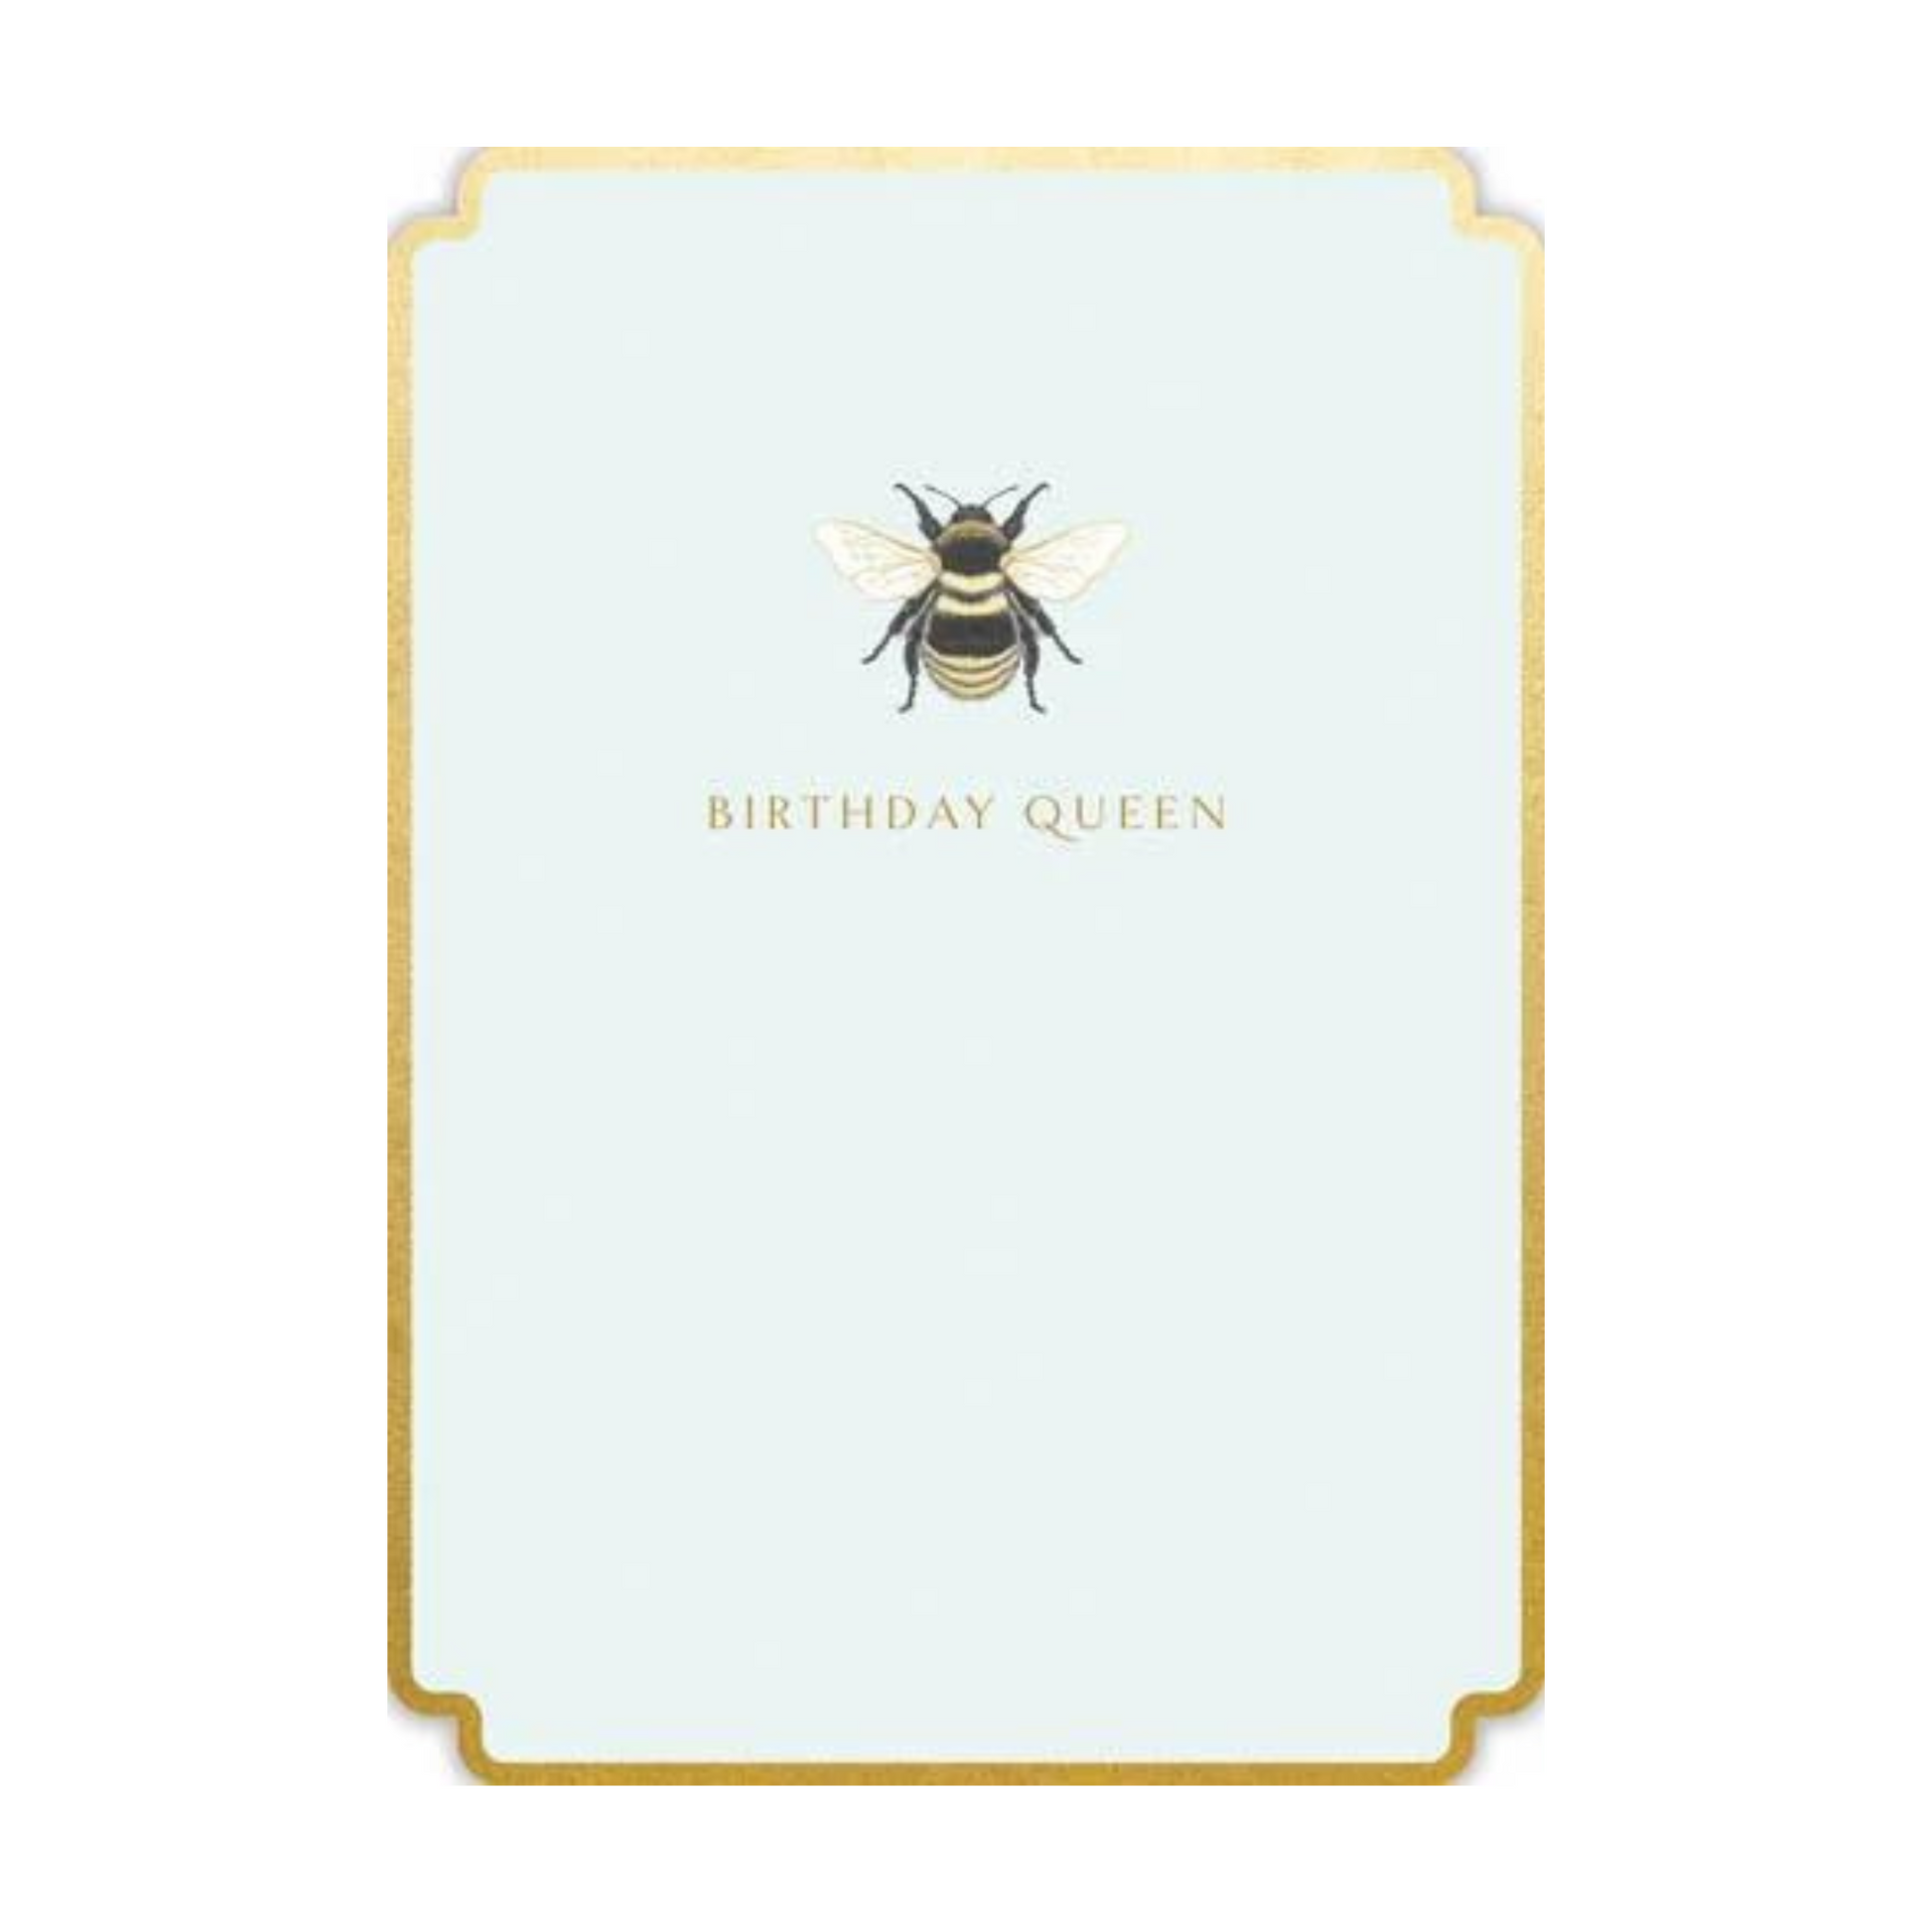 greeting card with birthday queen message on front